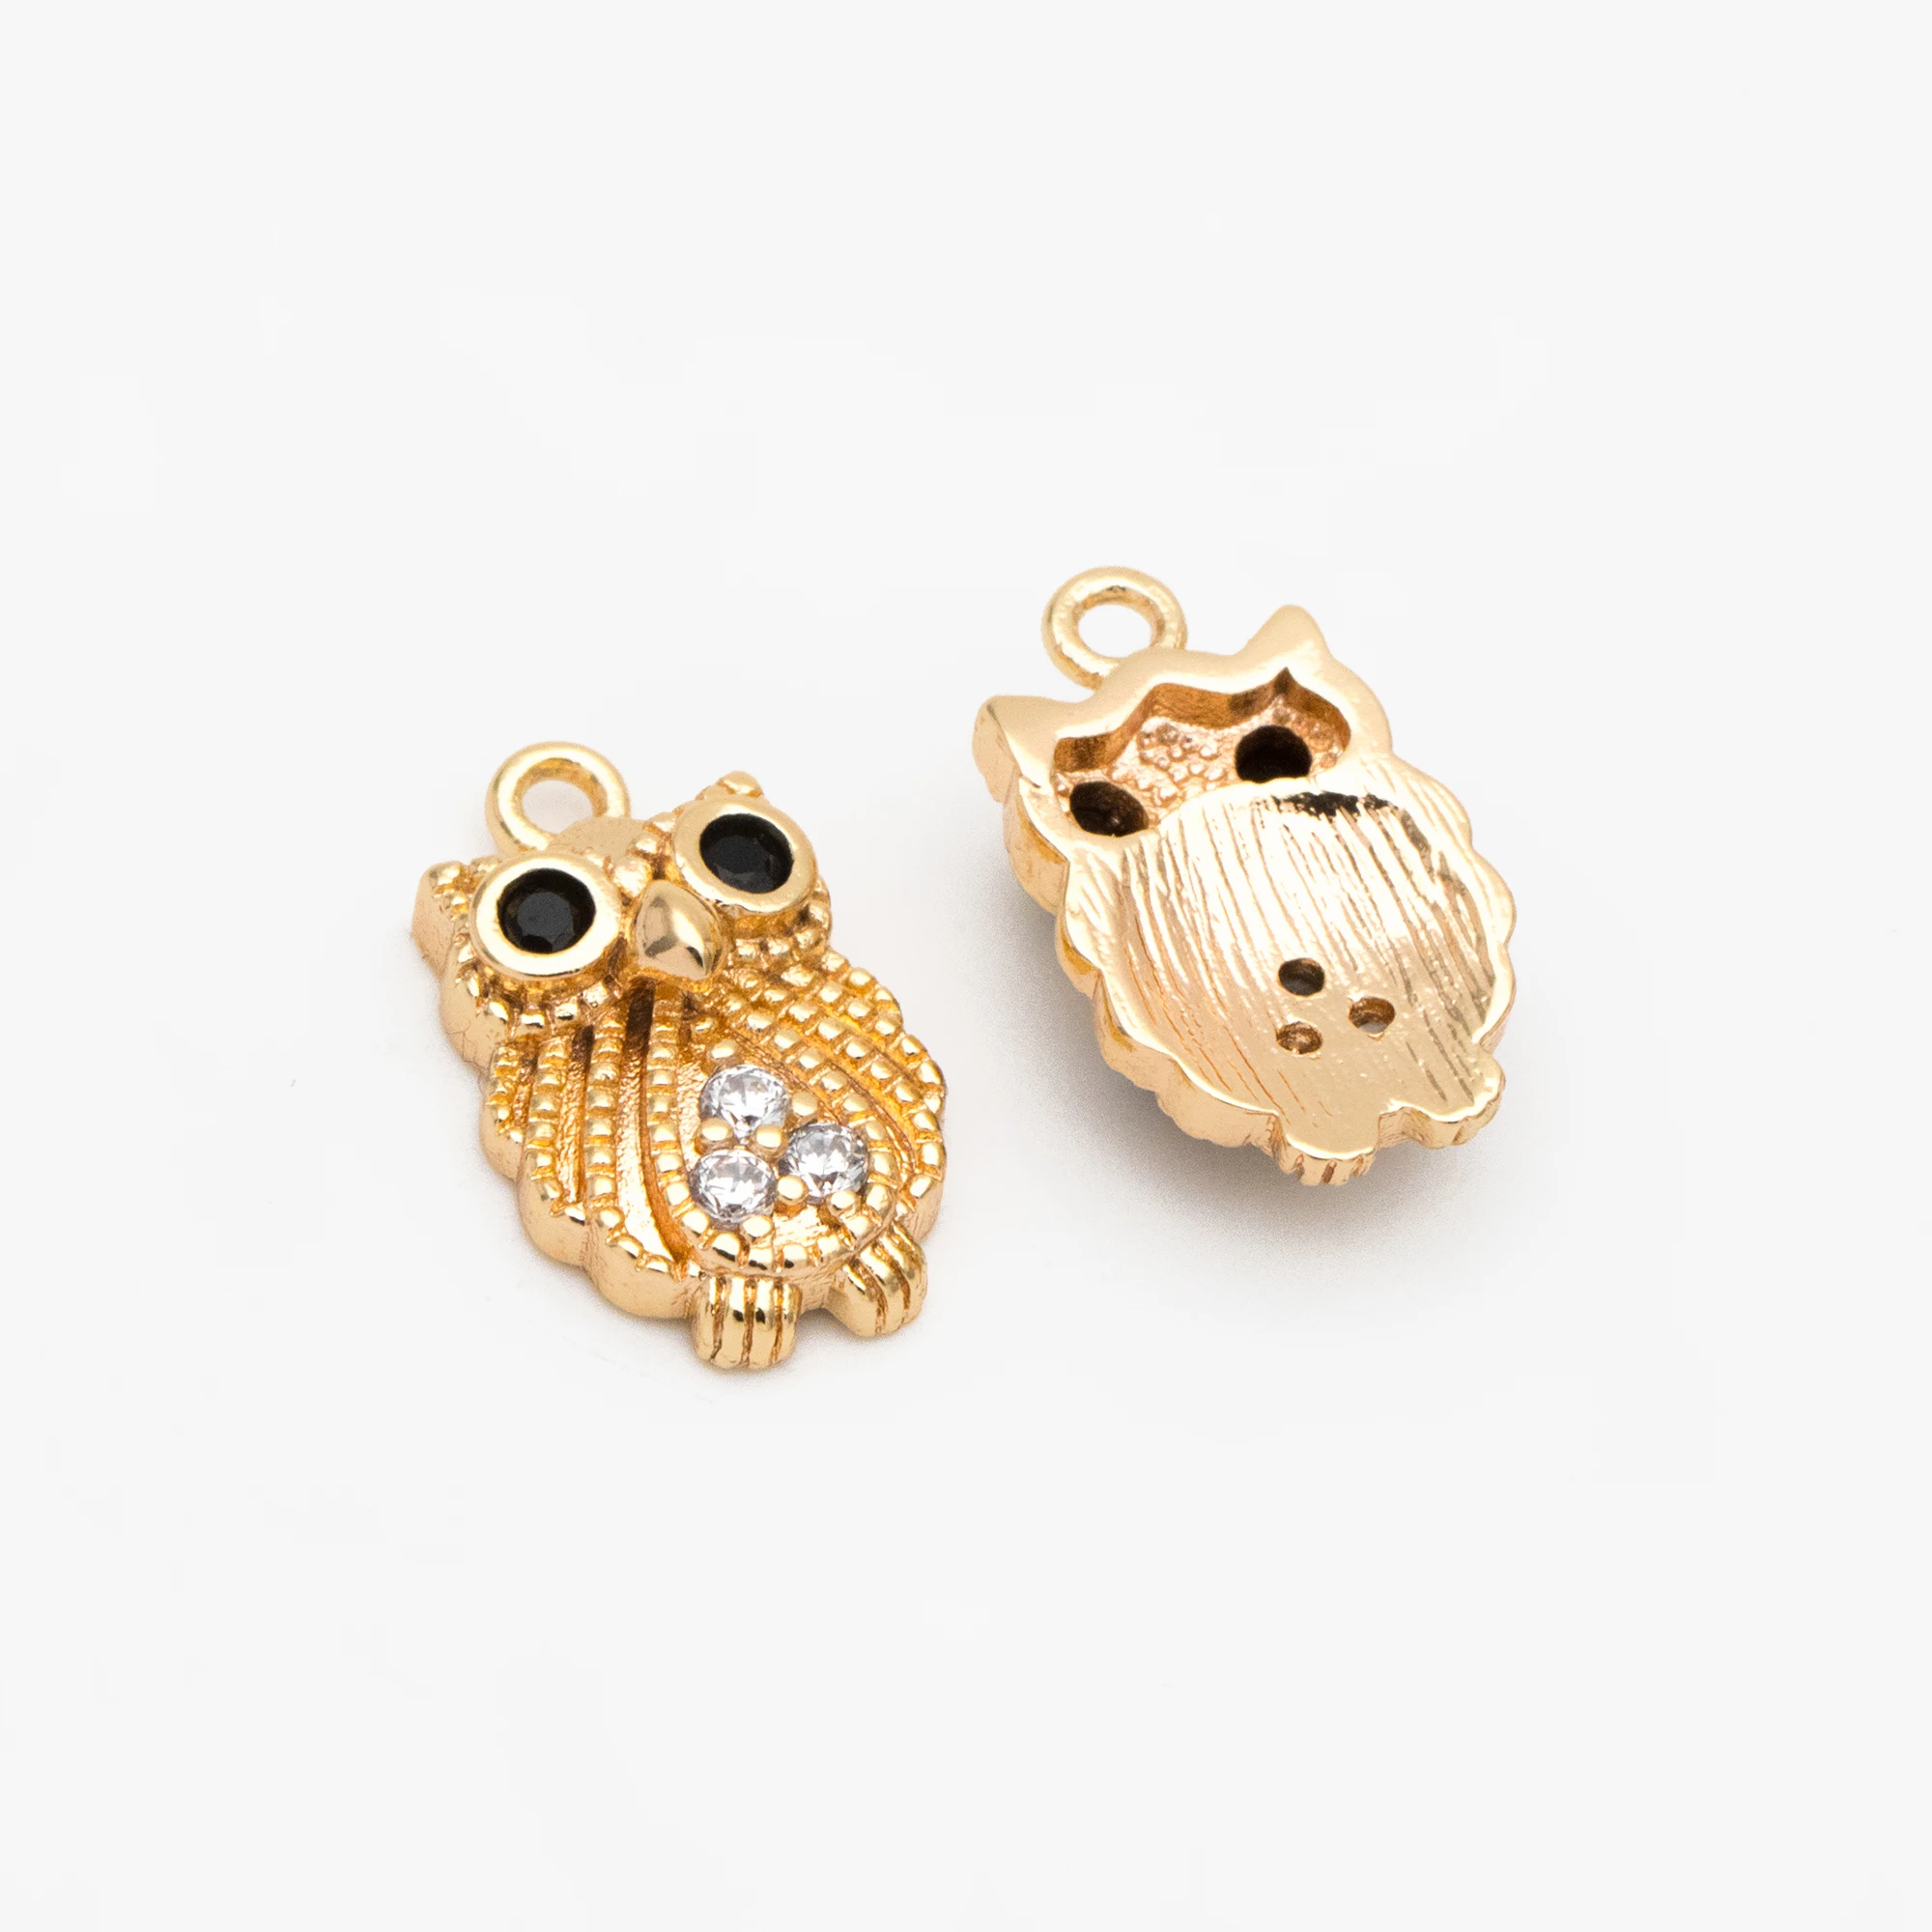 

4pcs CZ Pave Owl Charms 13x8mm, Gold Plated Brass Bird Pendants For Jewelry Making Diy Accessories Supplies (GB-3584)